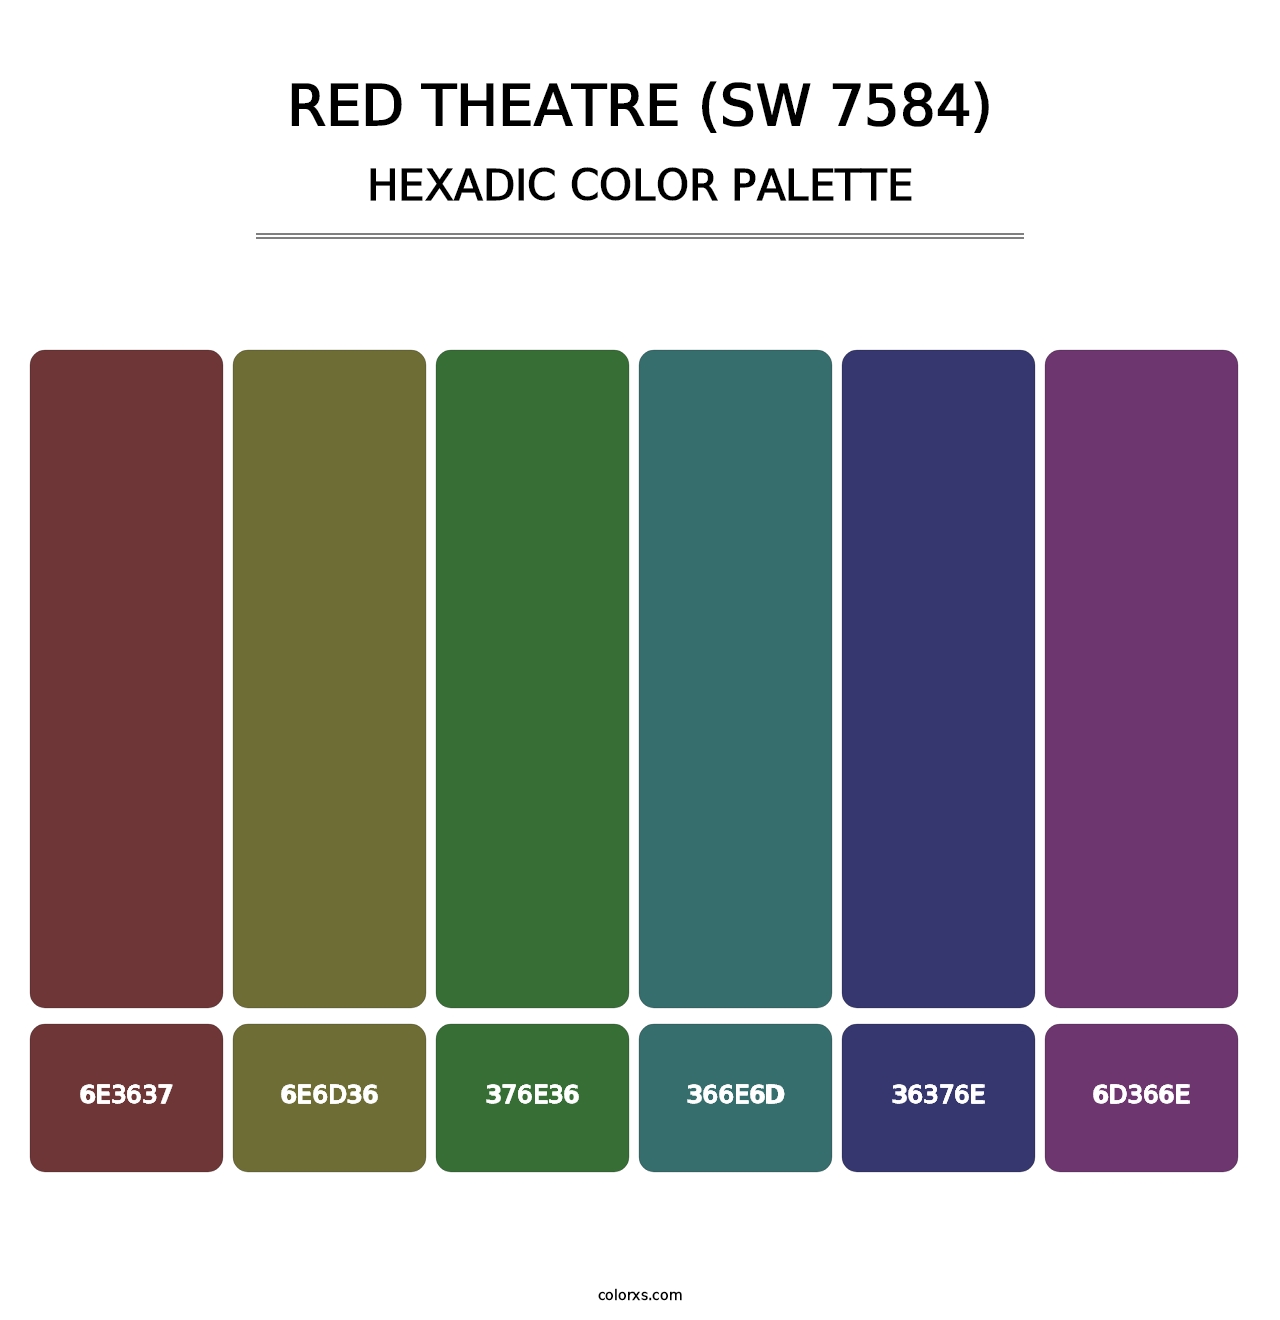 Red Theatre (SW 7584) - Hexadic Color Palette